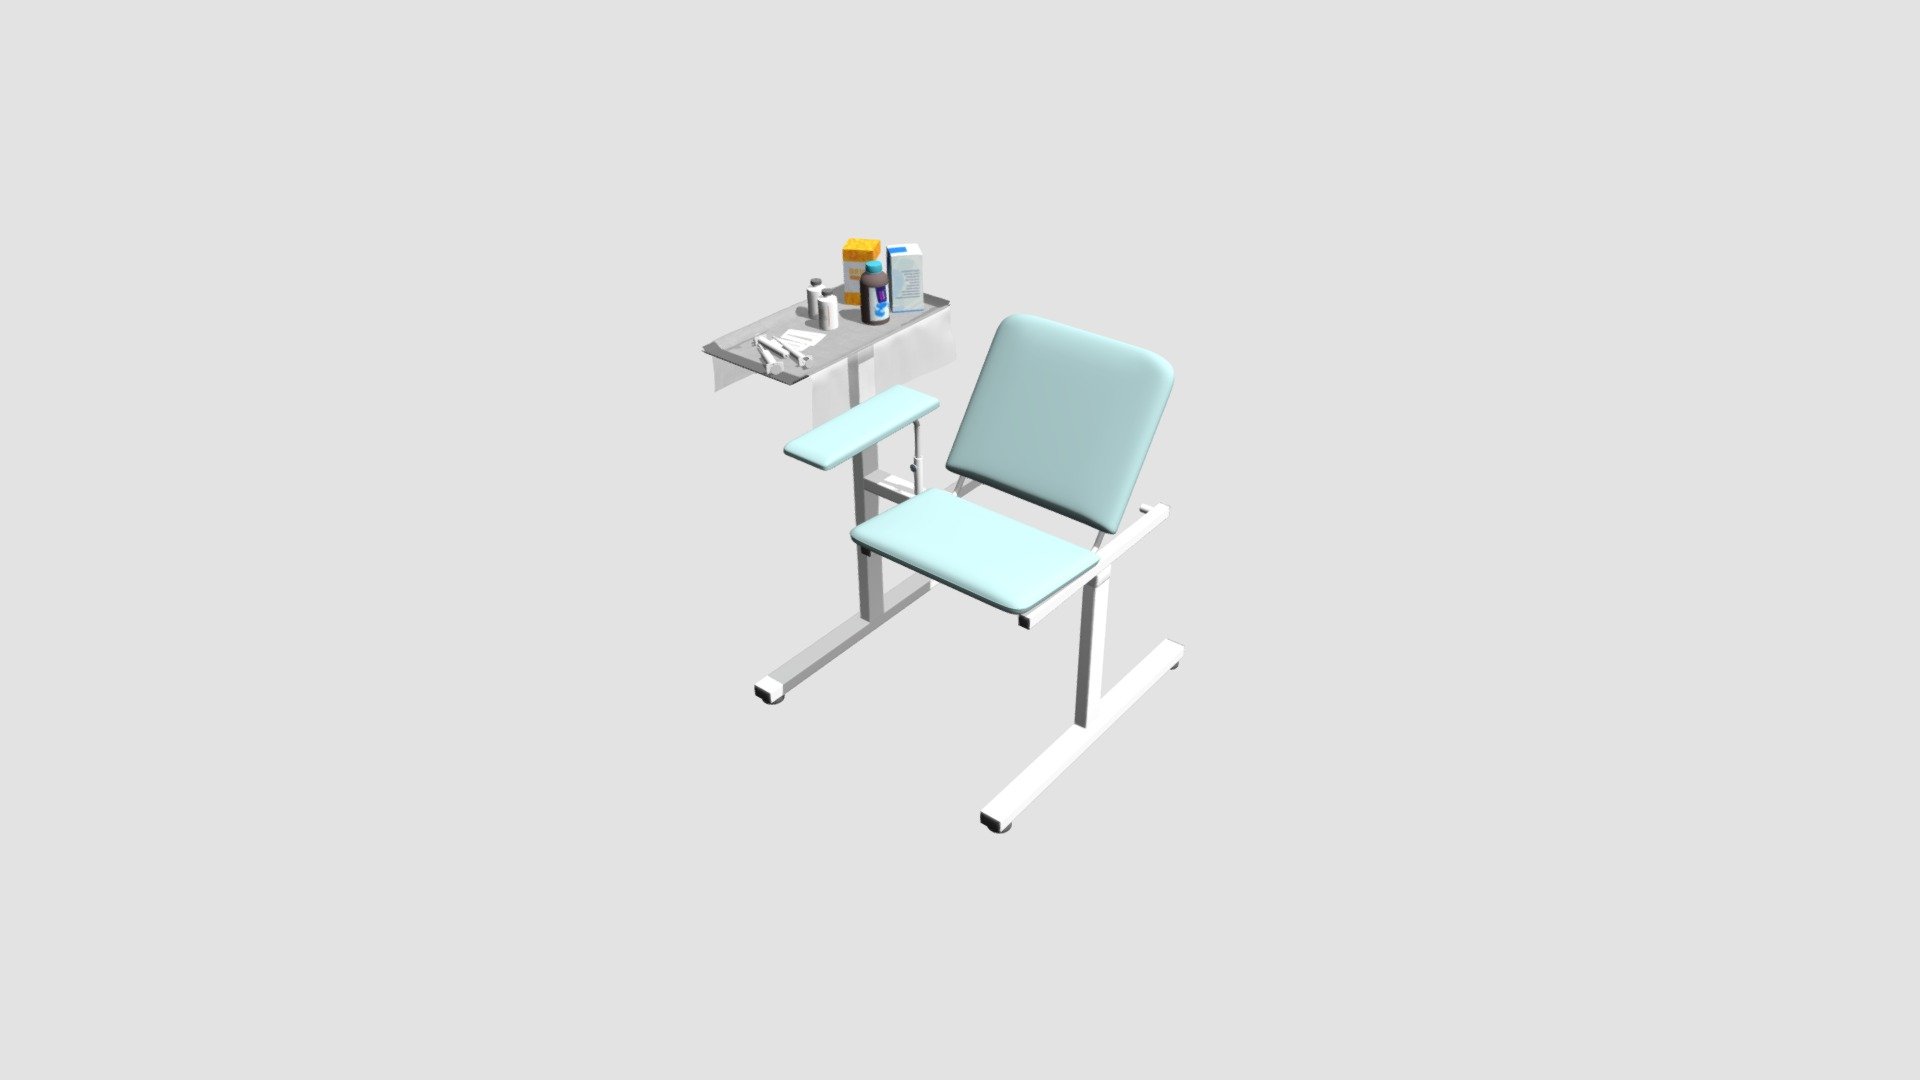 High detailed model of hospital equipment with all textures, shaders and materials. It is ready to use, just put it into your scene 3d model